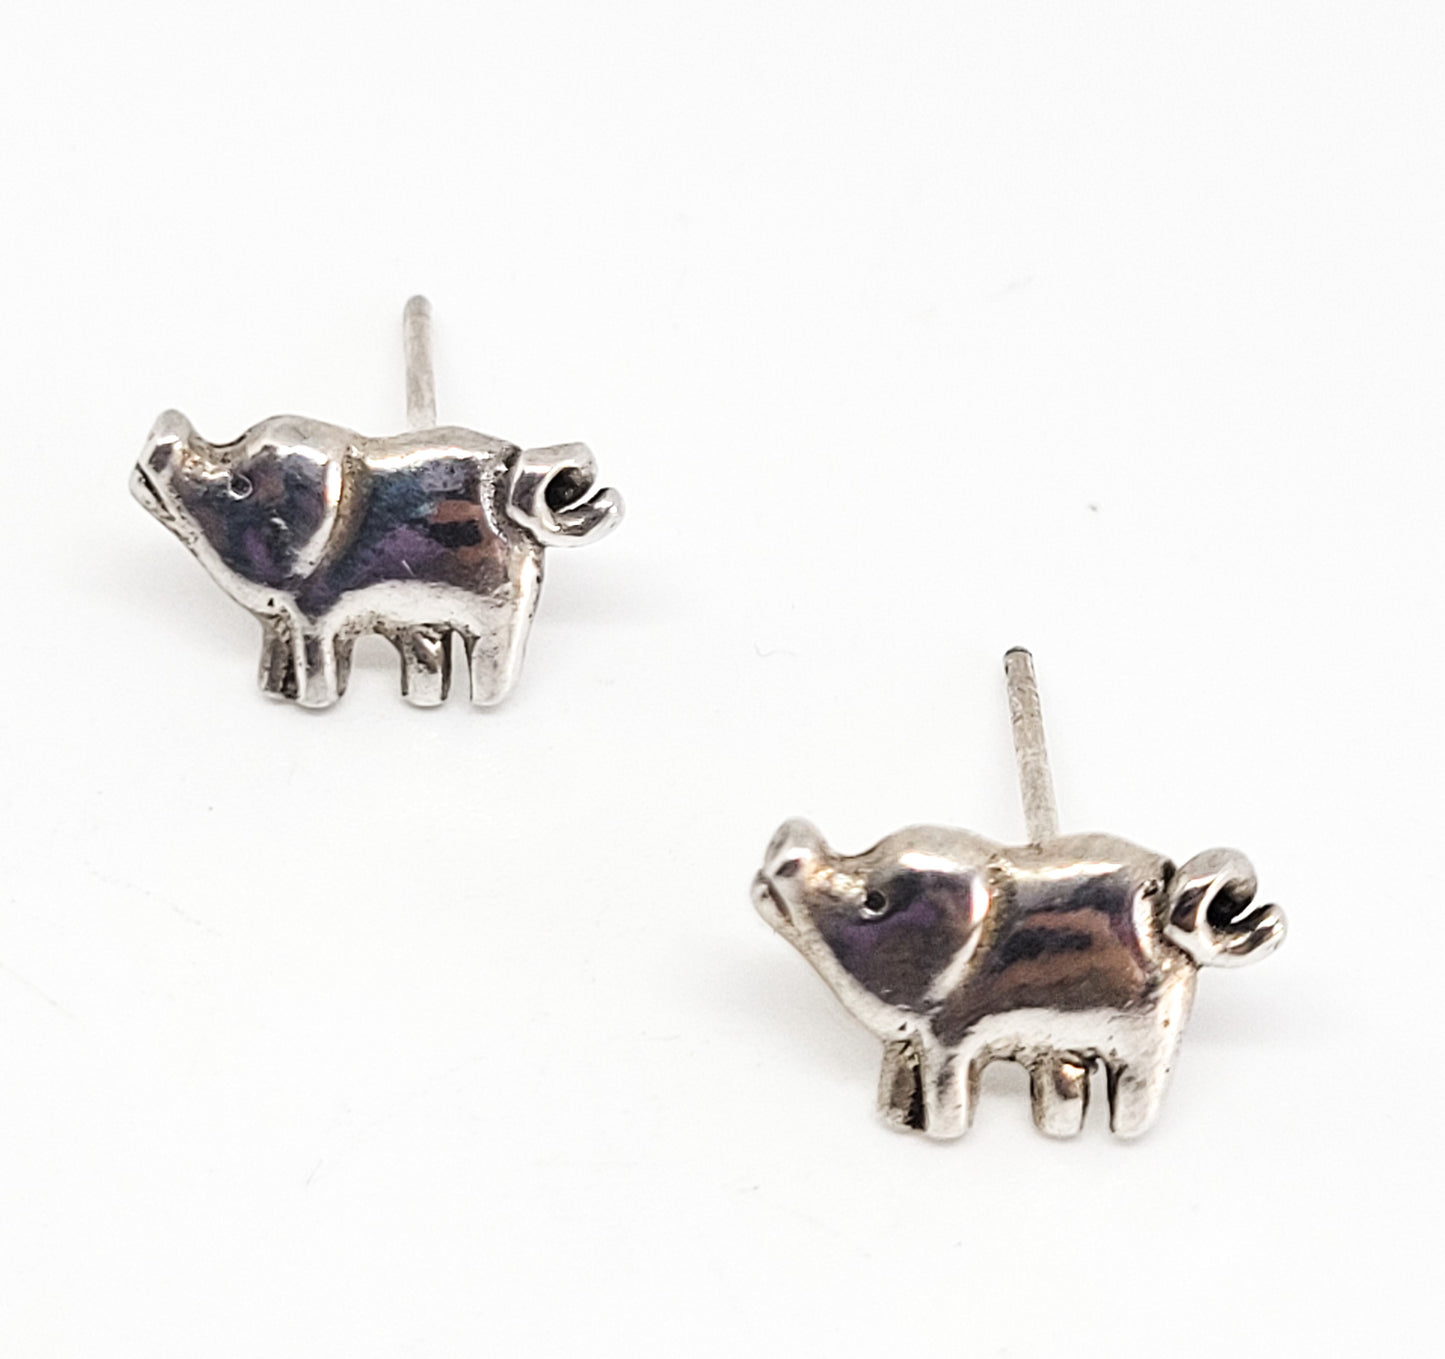 Happy pig curly tail figural farm sterling silver vintage stud earrings 925